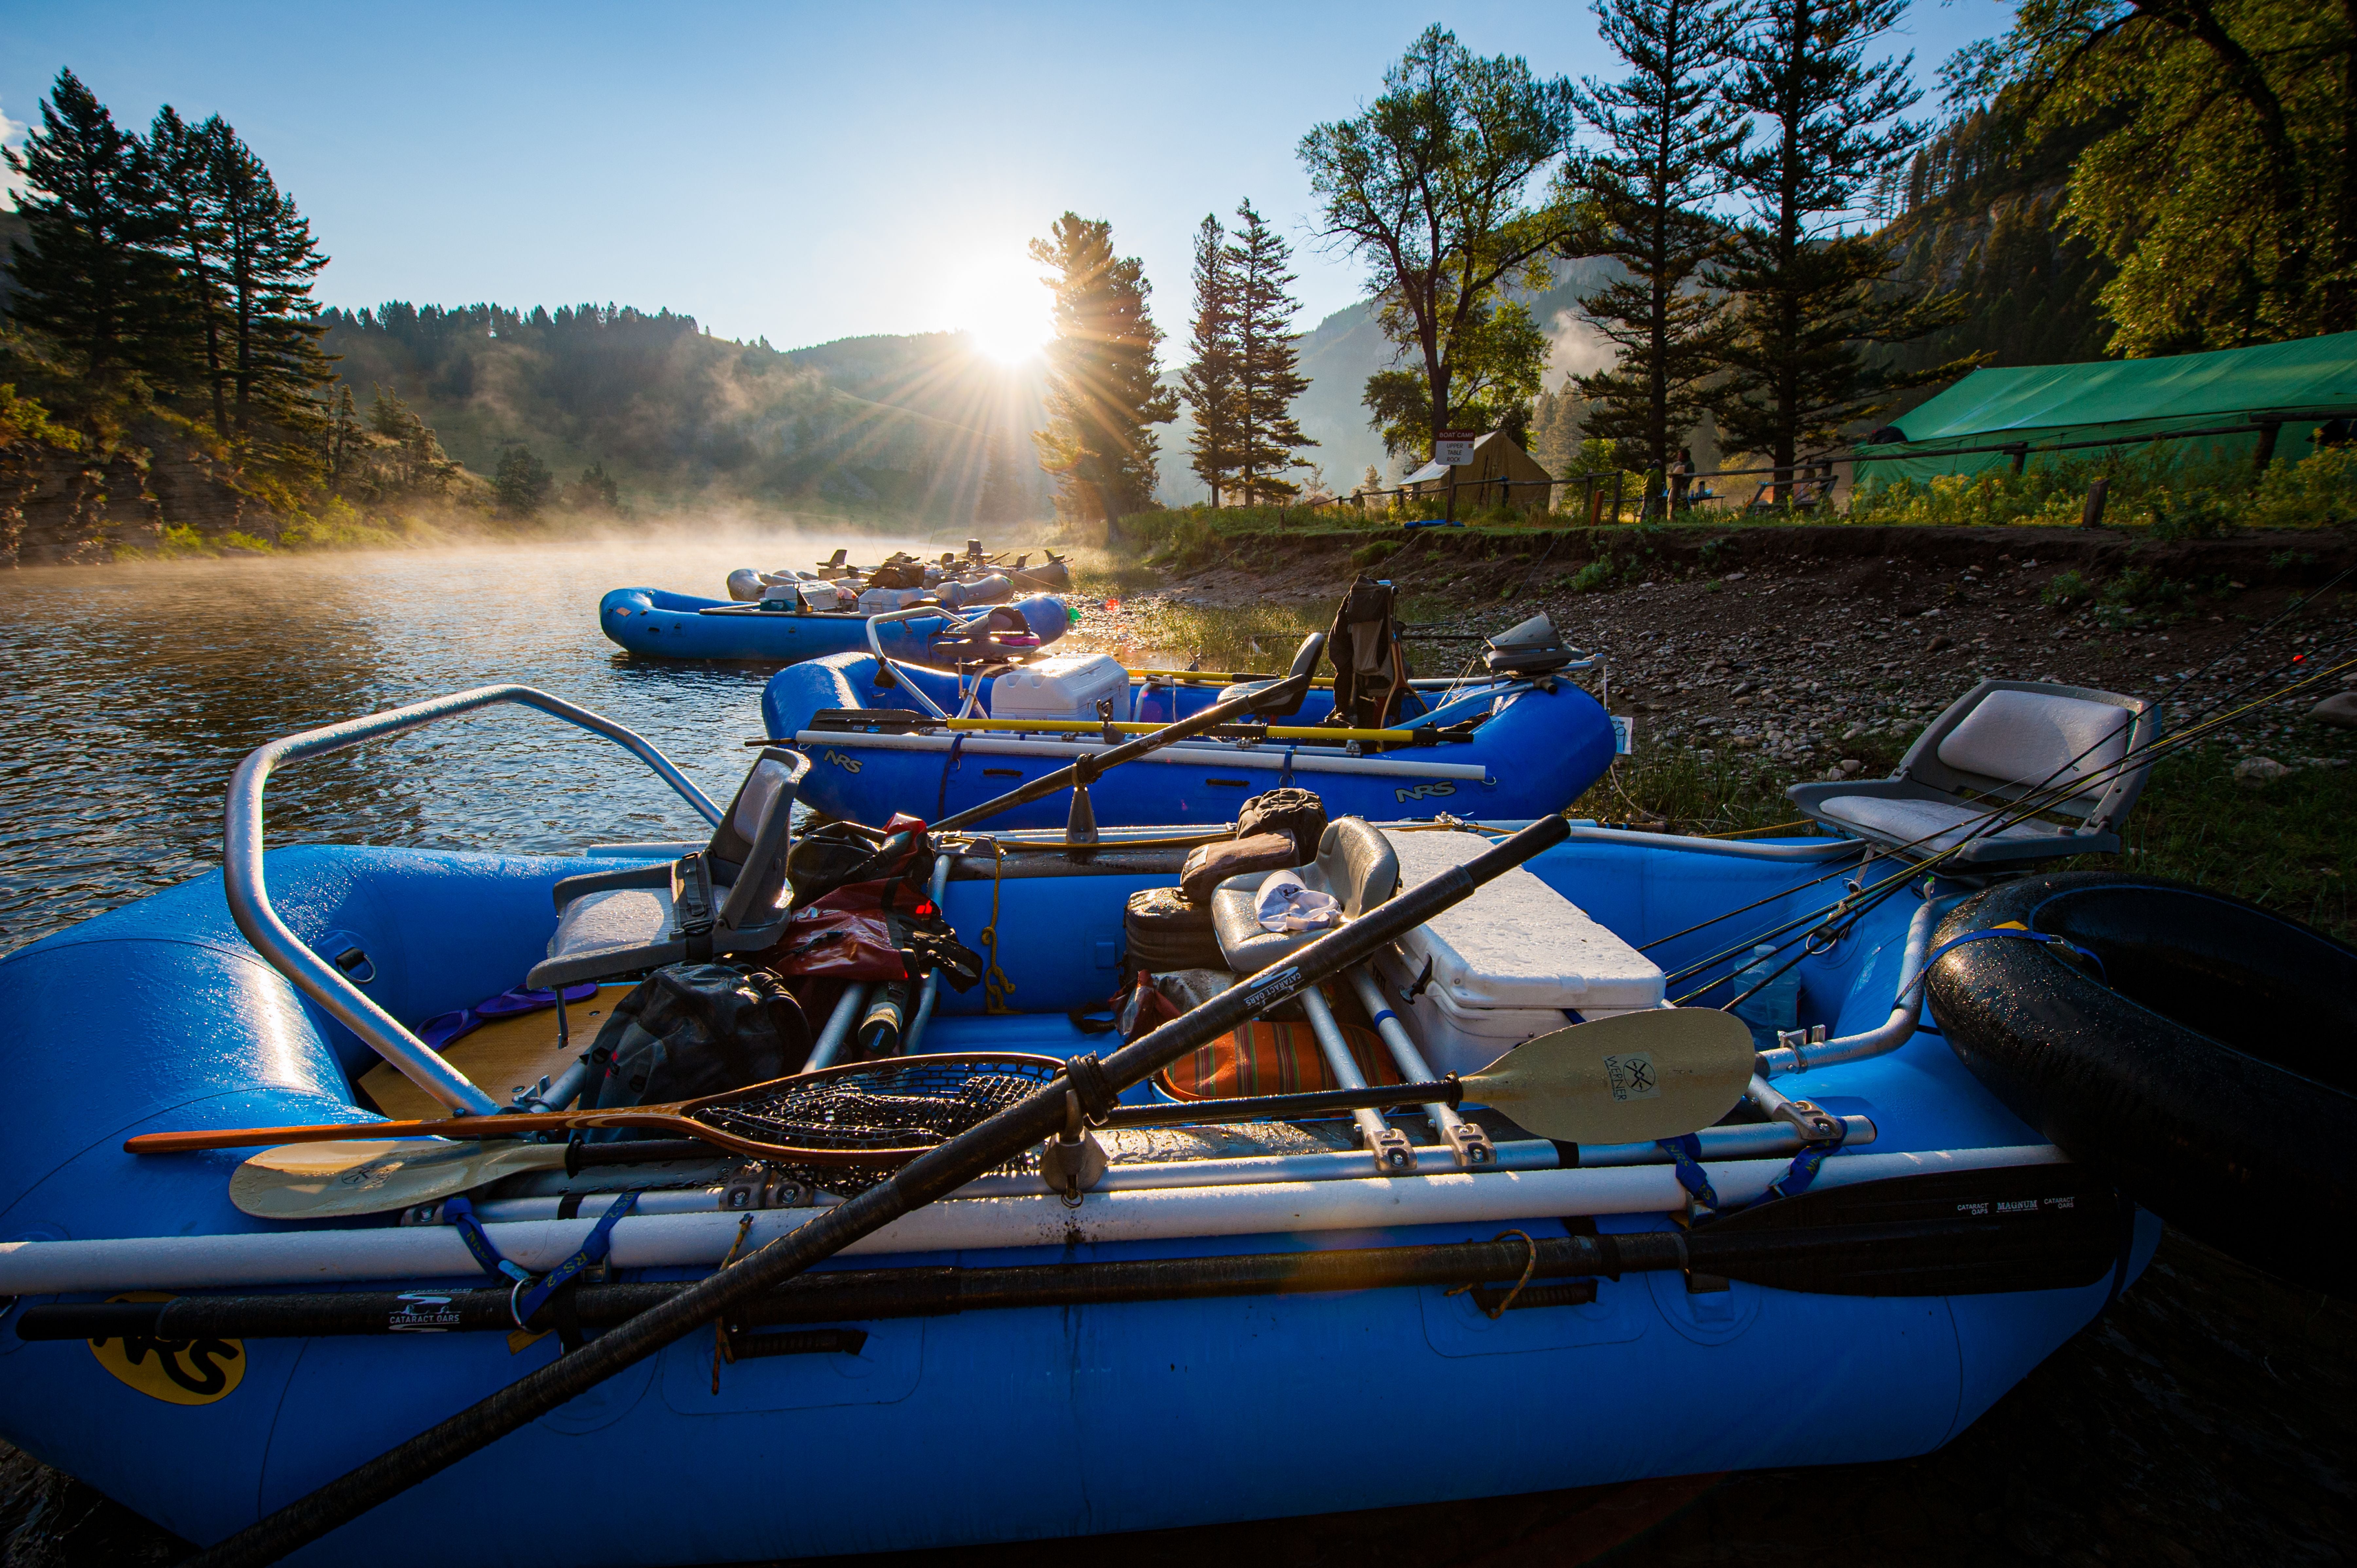 The Smith River in Montana is the only river that requires permits to float. It is beloved for trout fishing and rafting. A multinational corporation plans to build a copper mine in the watershed threatening the health of the river.
(Brian Grossenbacher)